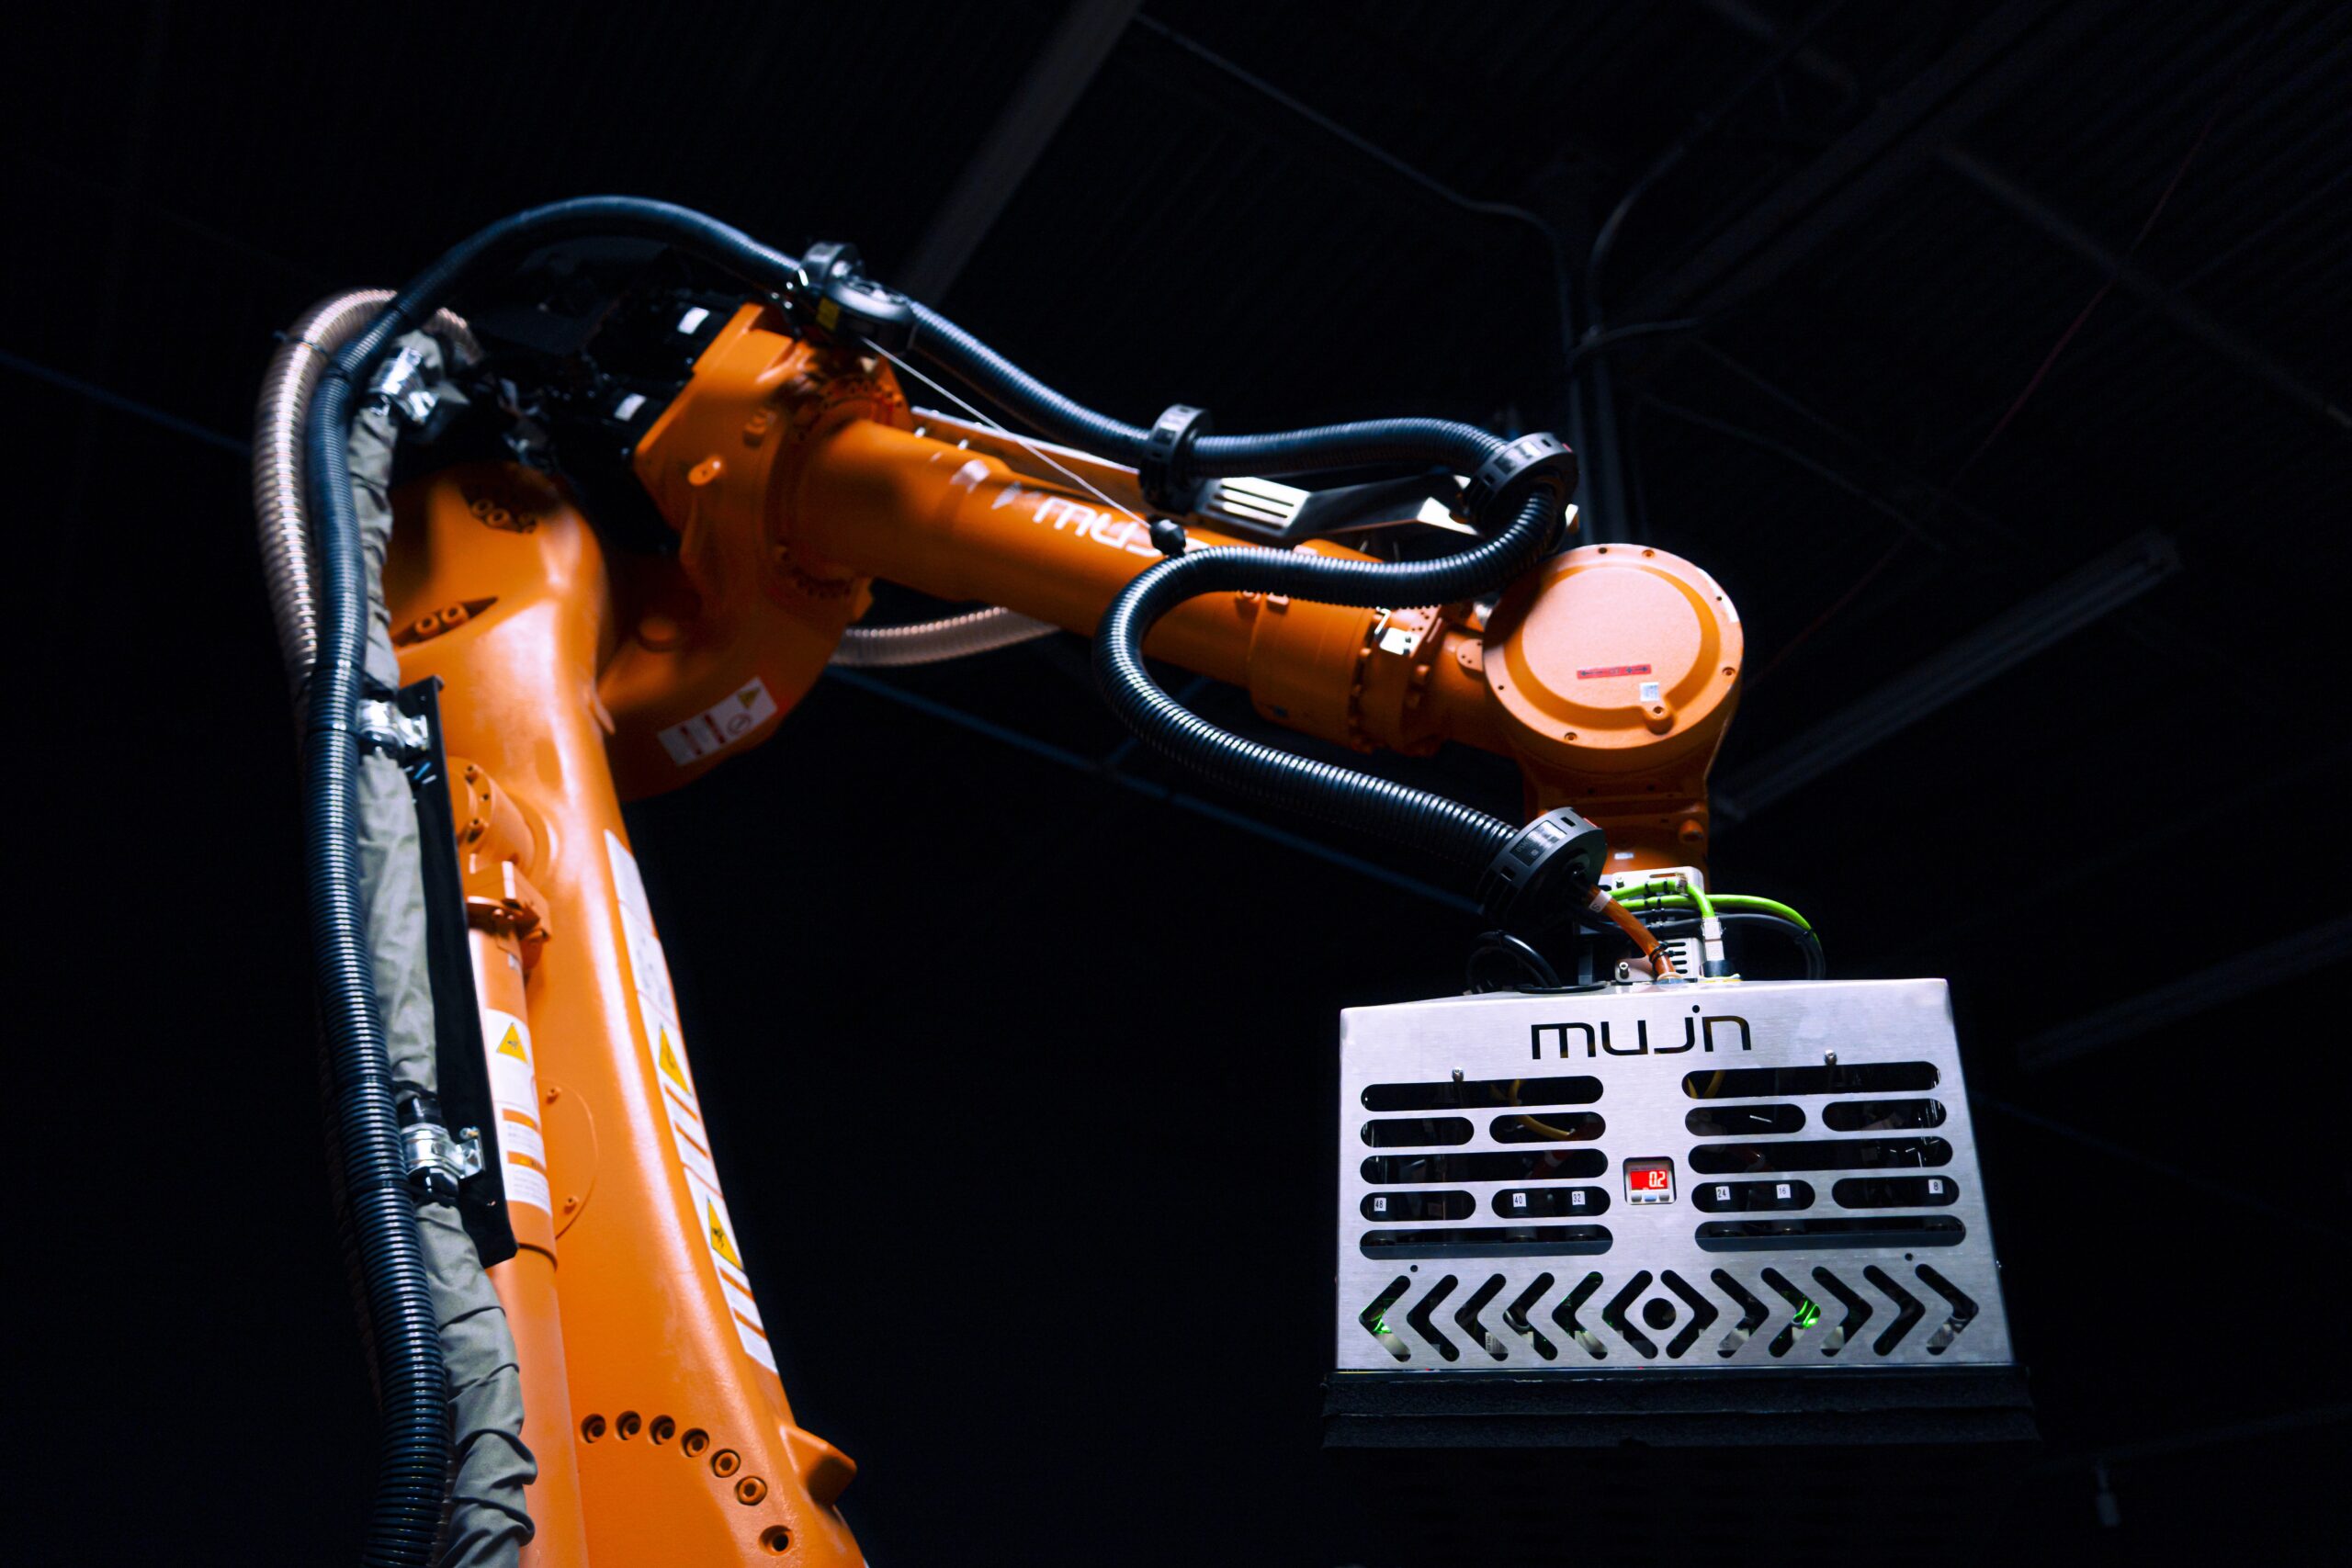 Mujin Secures New Funding to Expand Robotic Automation | AEI